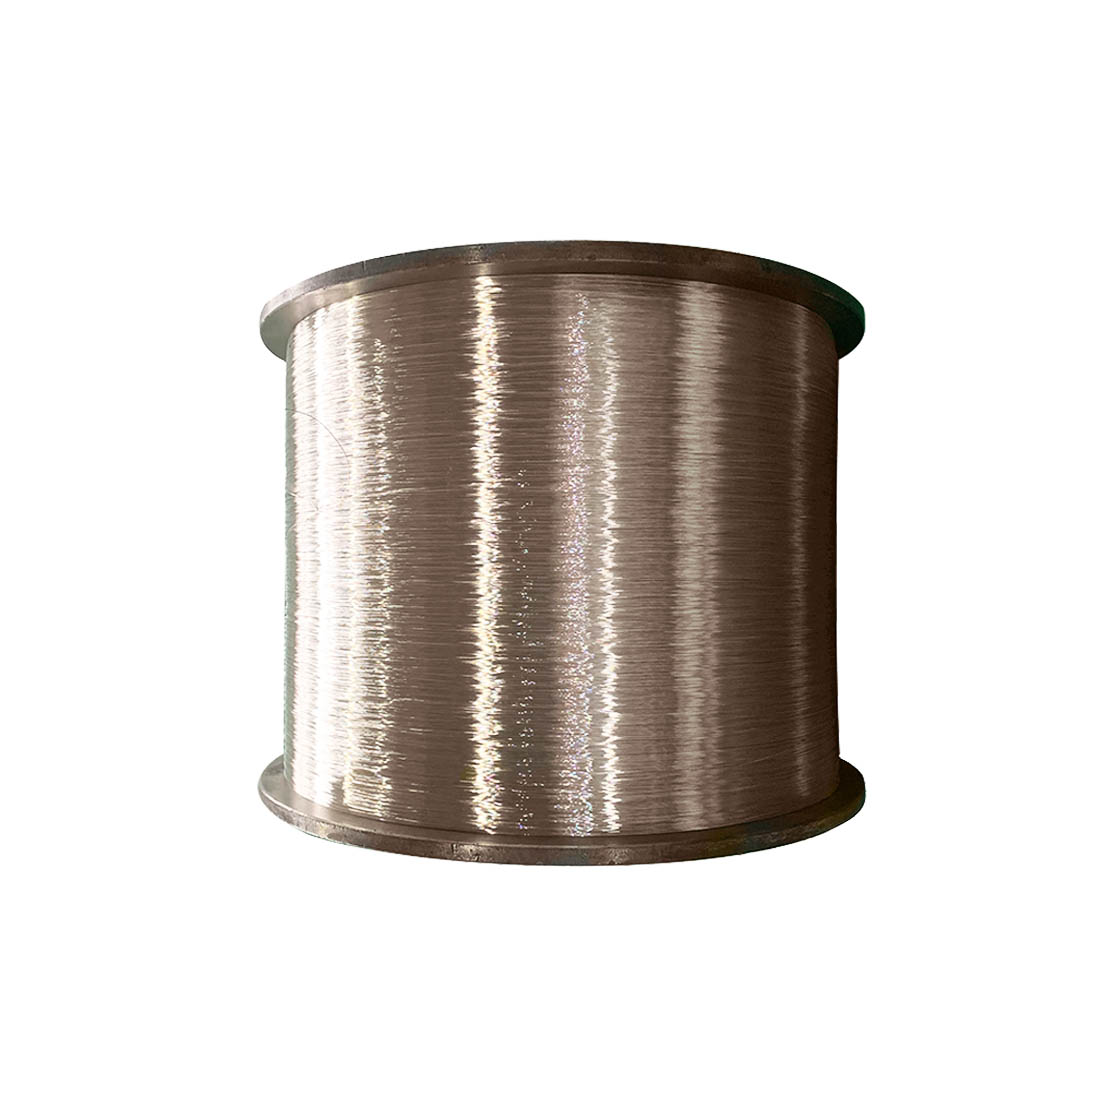 Good quality 0.08-0.12mm conductor nickel plated copper wire used for wires and cables Featured Image